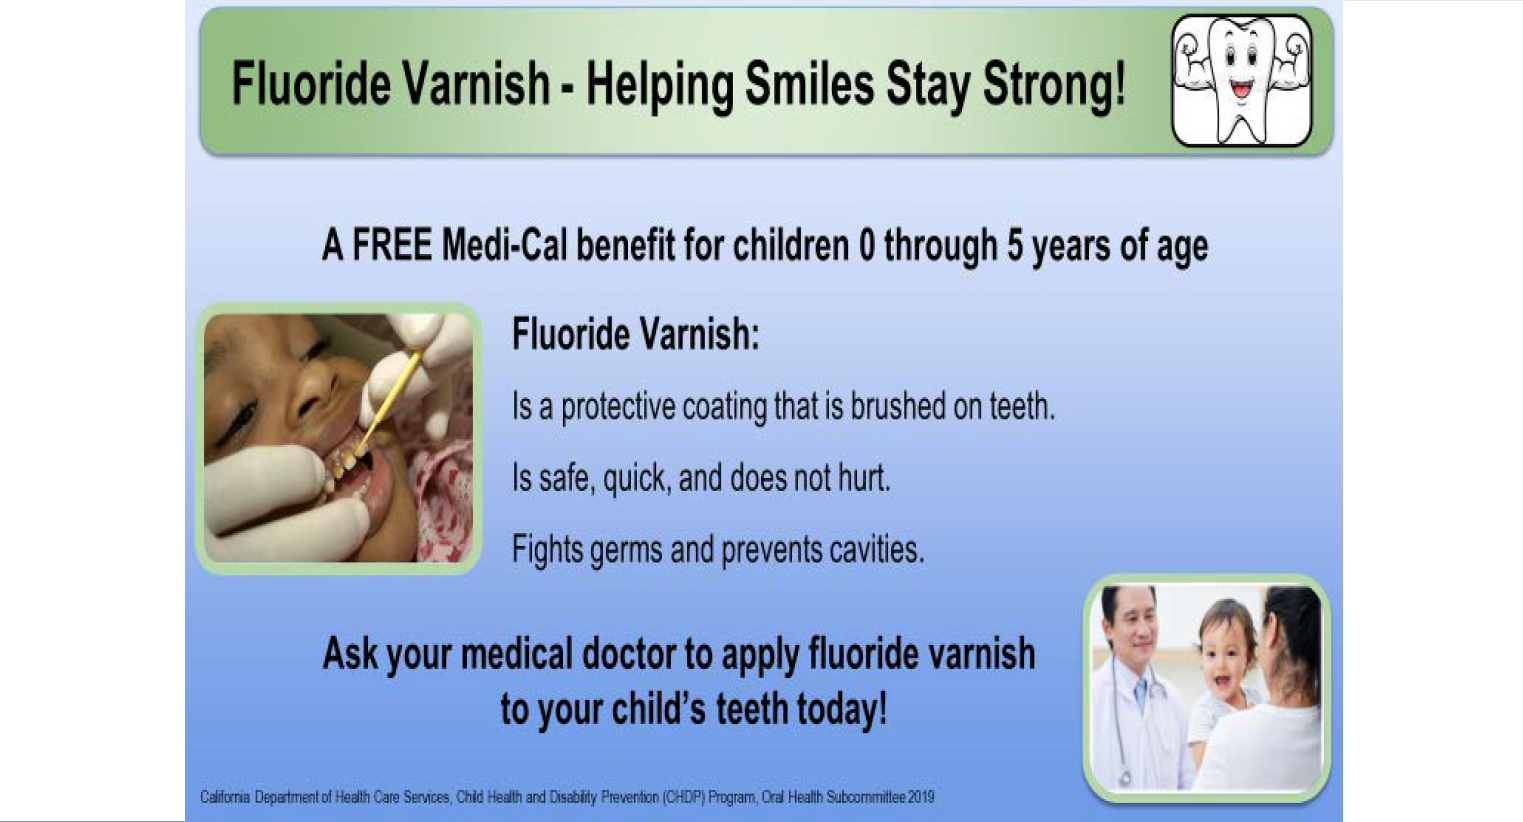 Fluoride Varnish Helping Smilies Stay Strong